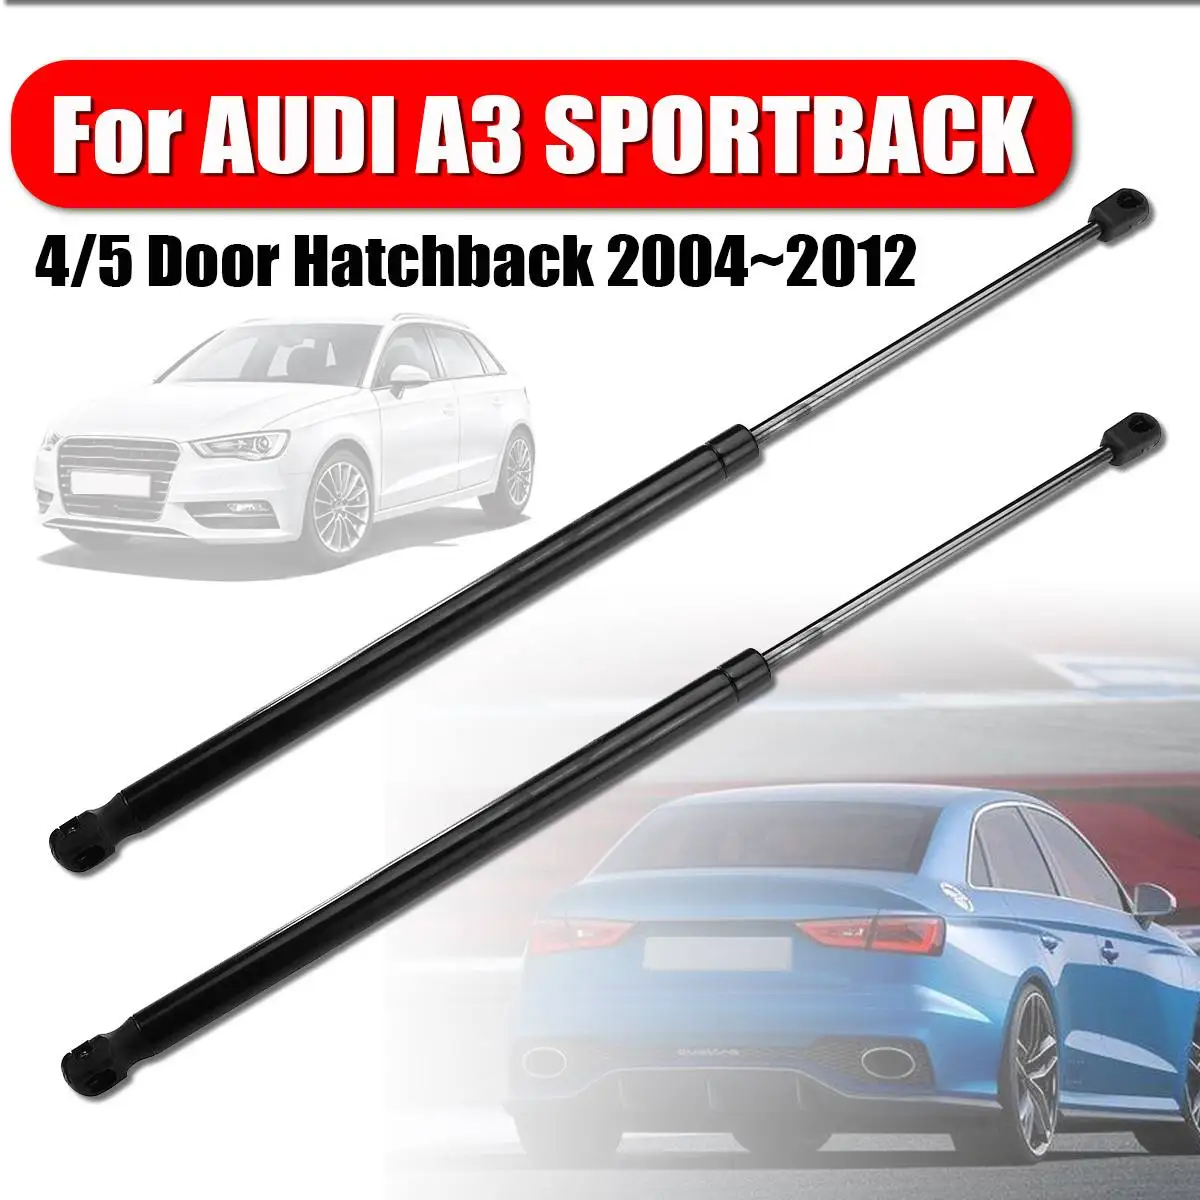 

1Pair Car Rear Tailgate Trunk Gas Spring Hood Lift For AUDI A3 SPORTBACK 4/5 Rear Trunk Tailgate 2004~2012